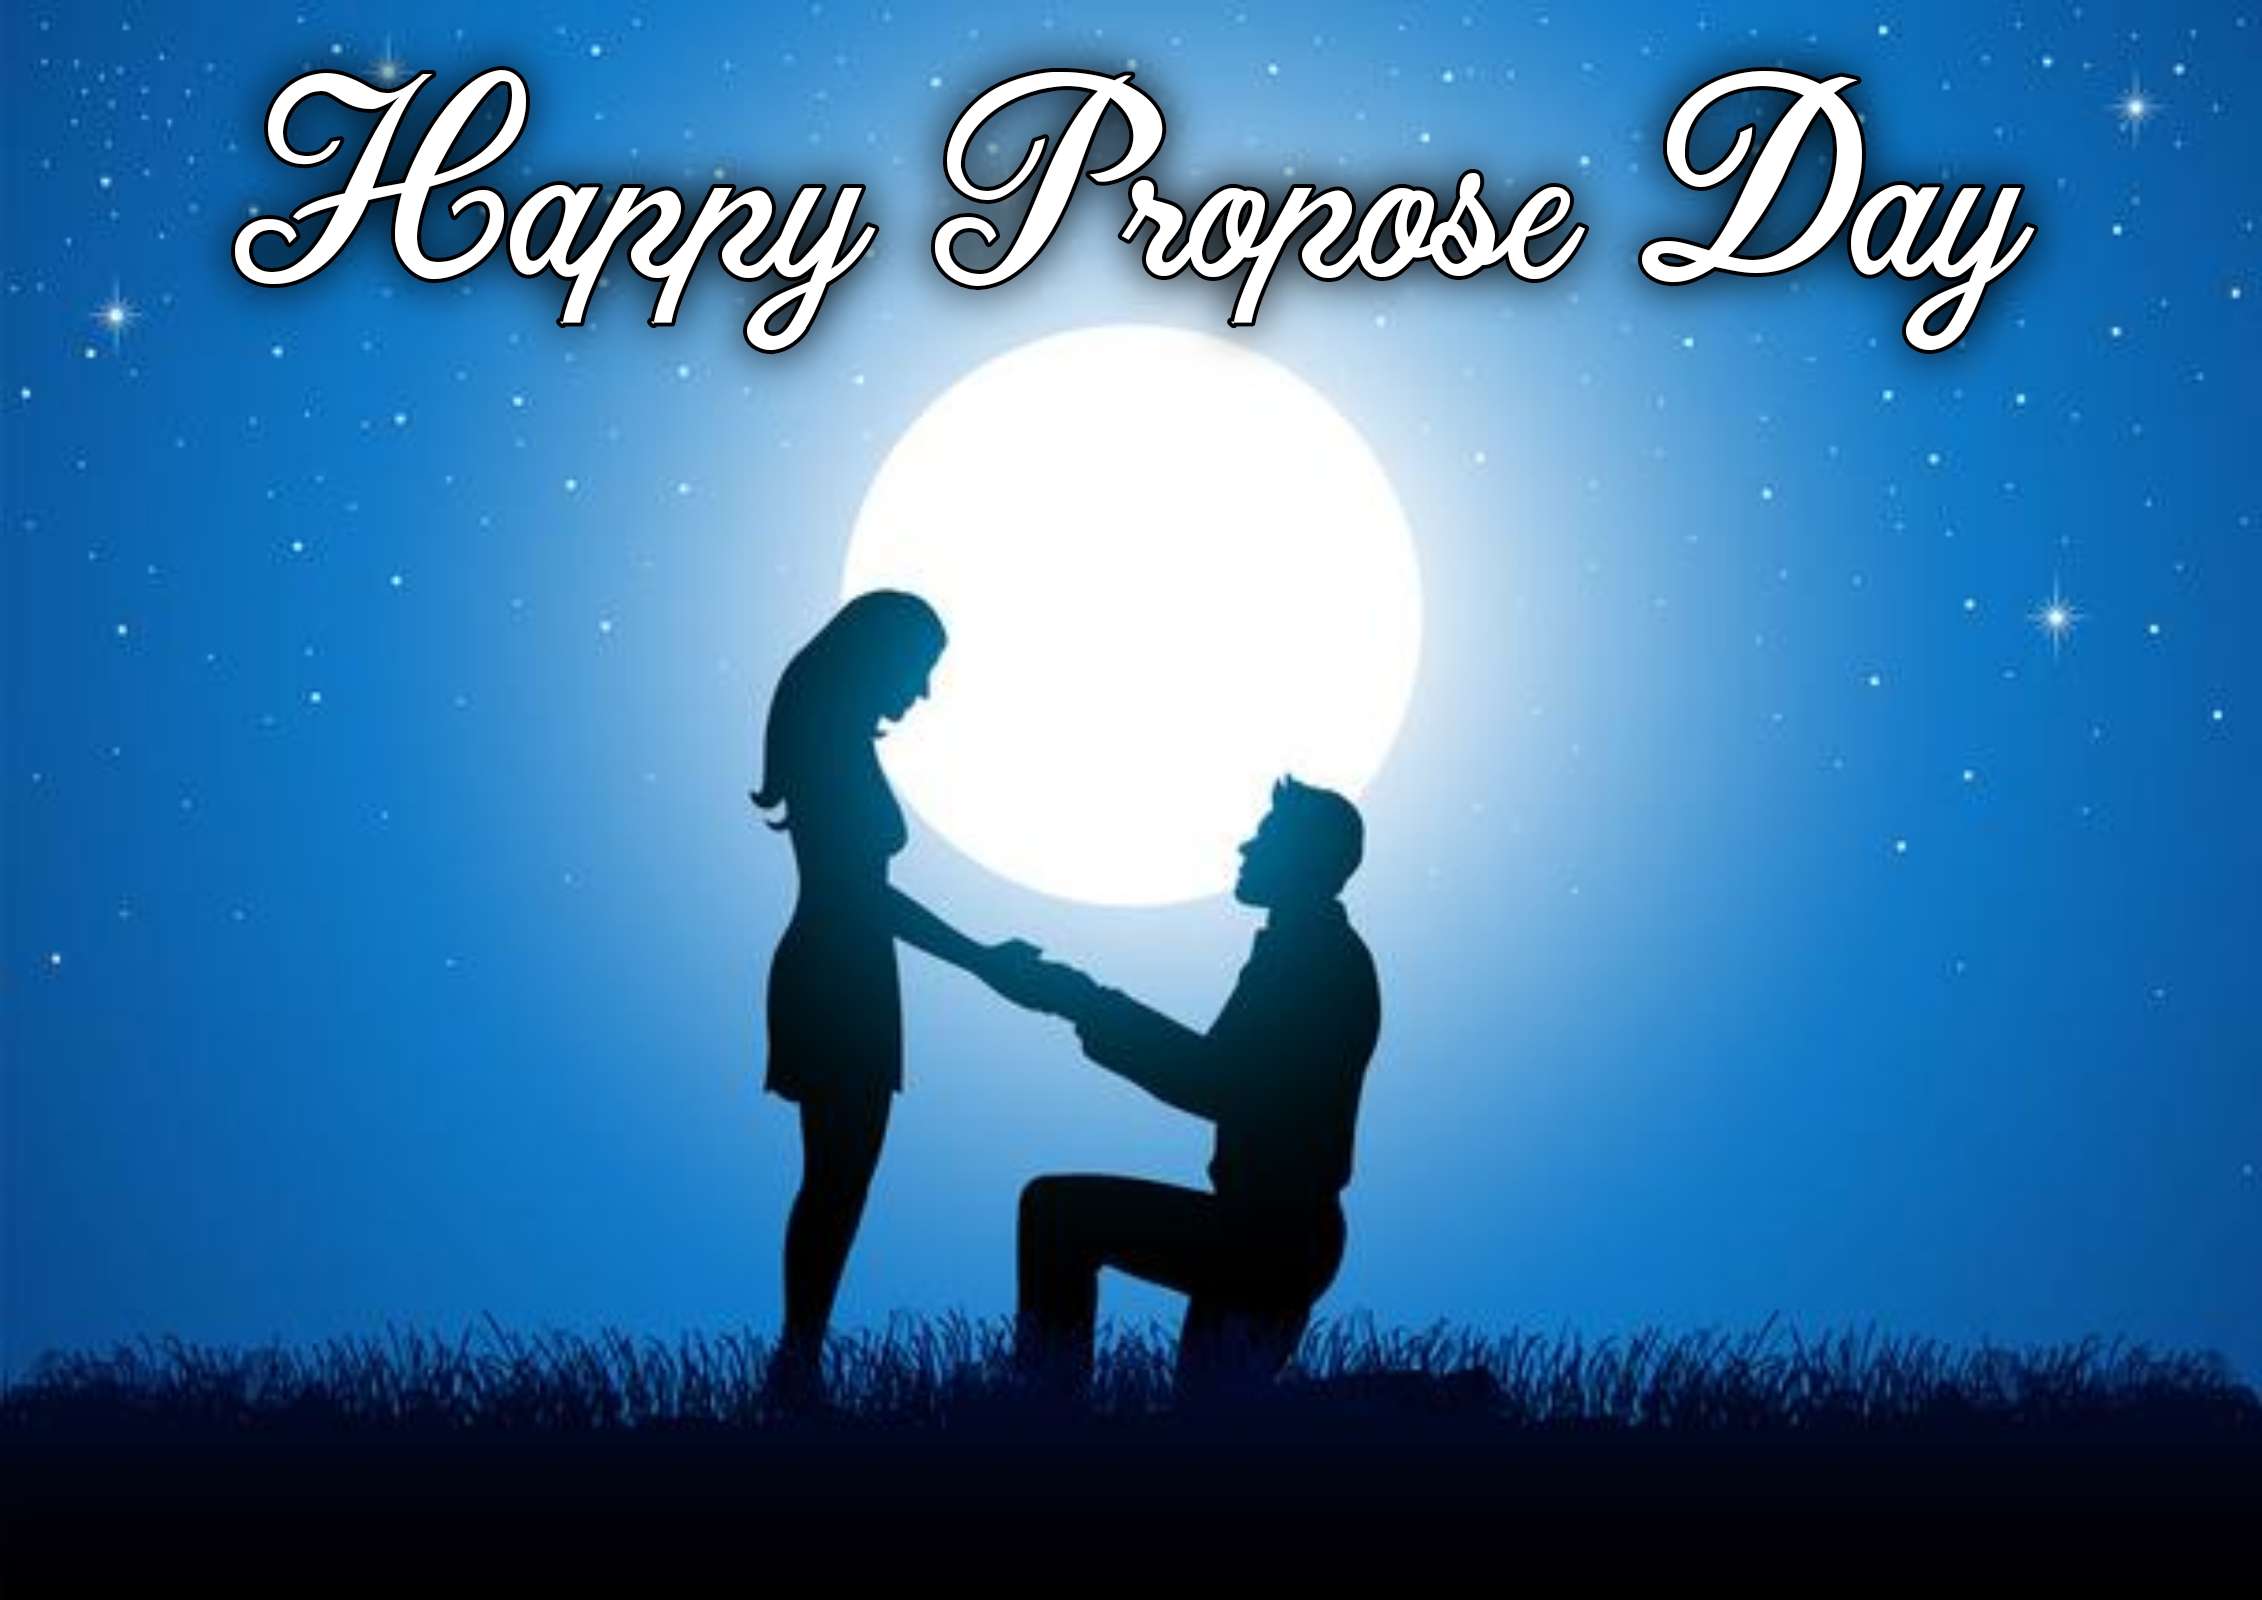 Propose Day Pic Download